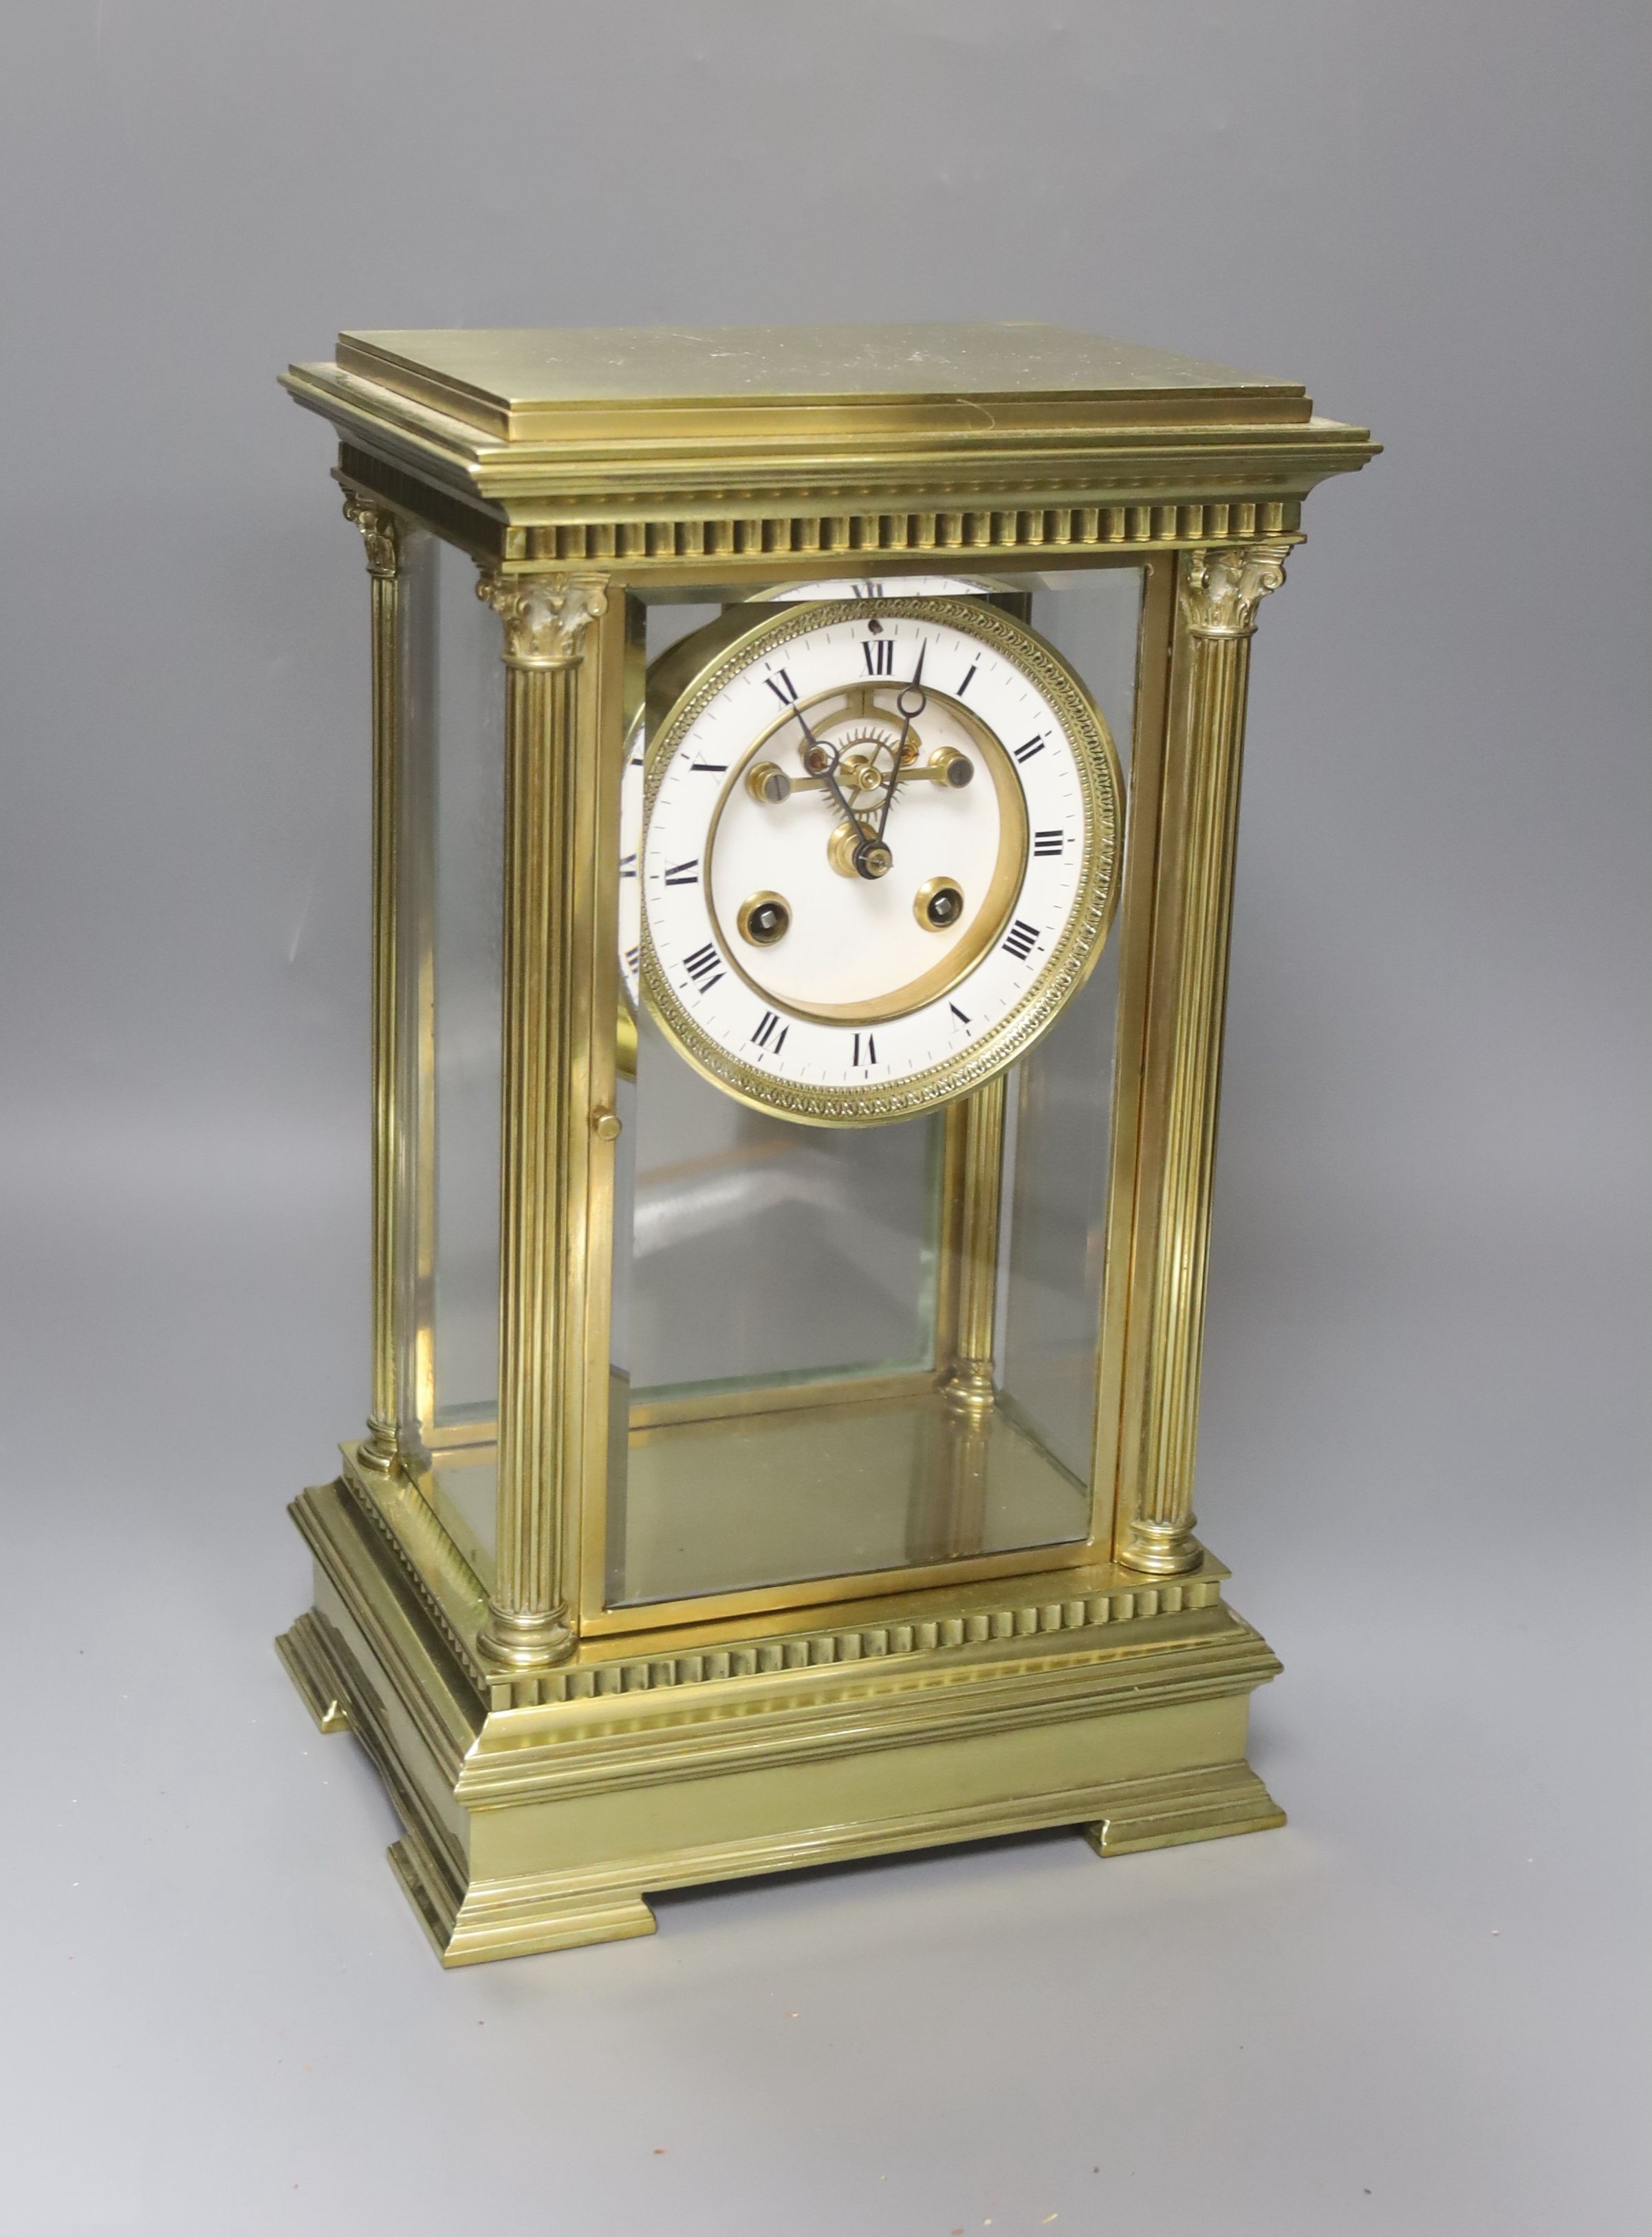 A 19th century French four-glass mantel clock with key and mercury filled pendulum bob 34cm